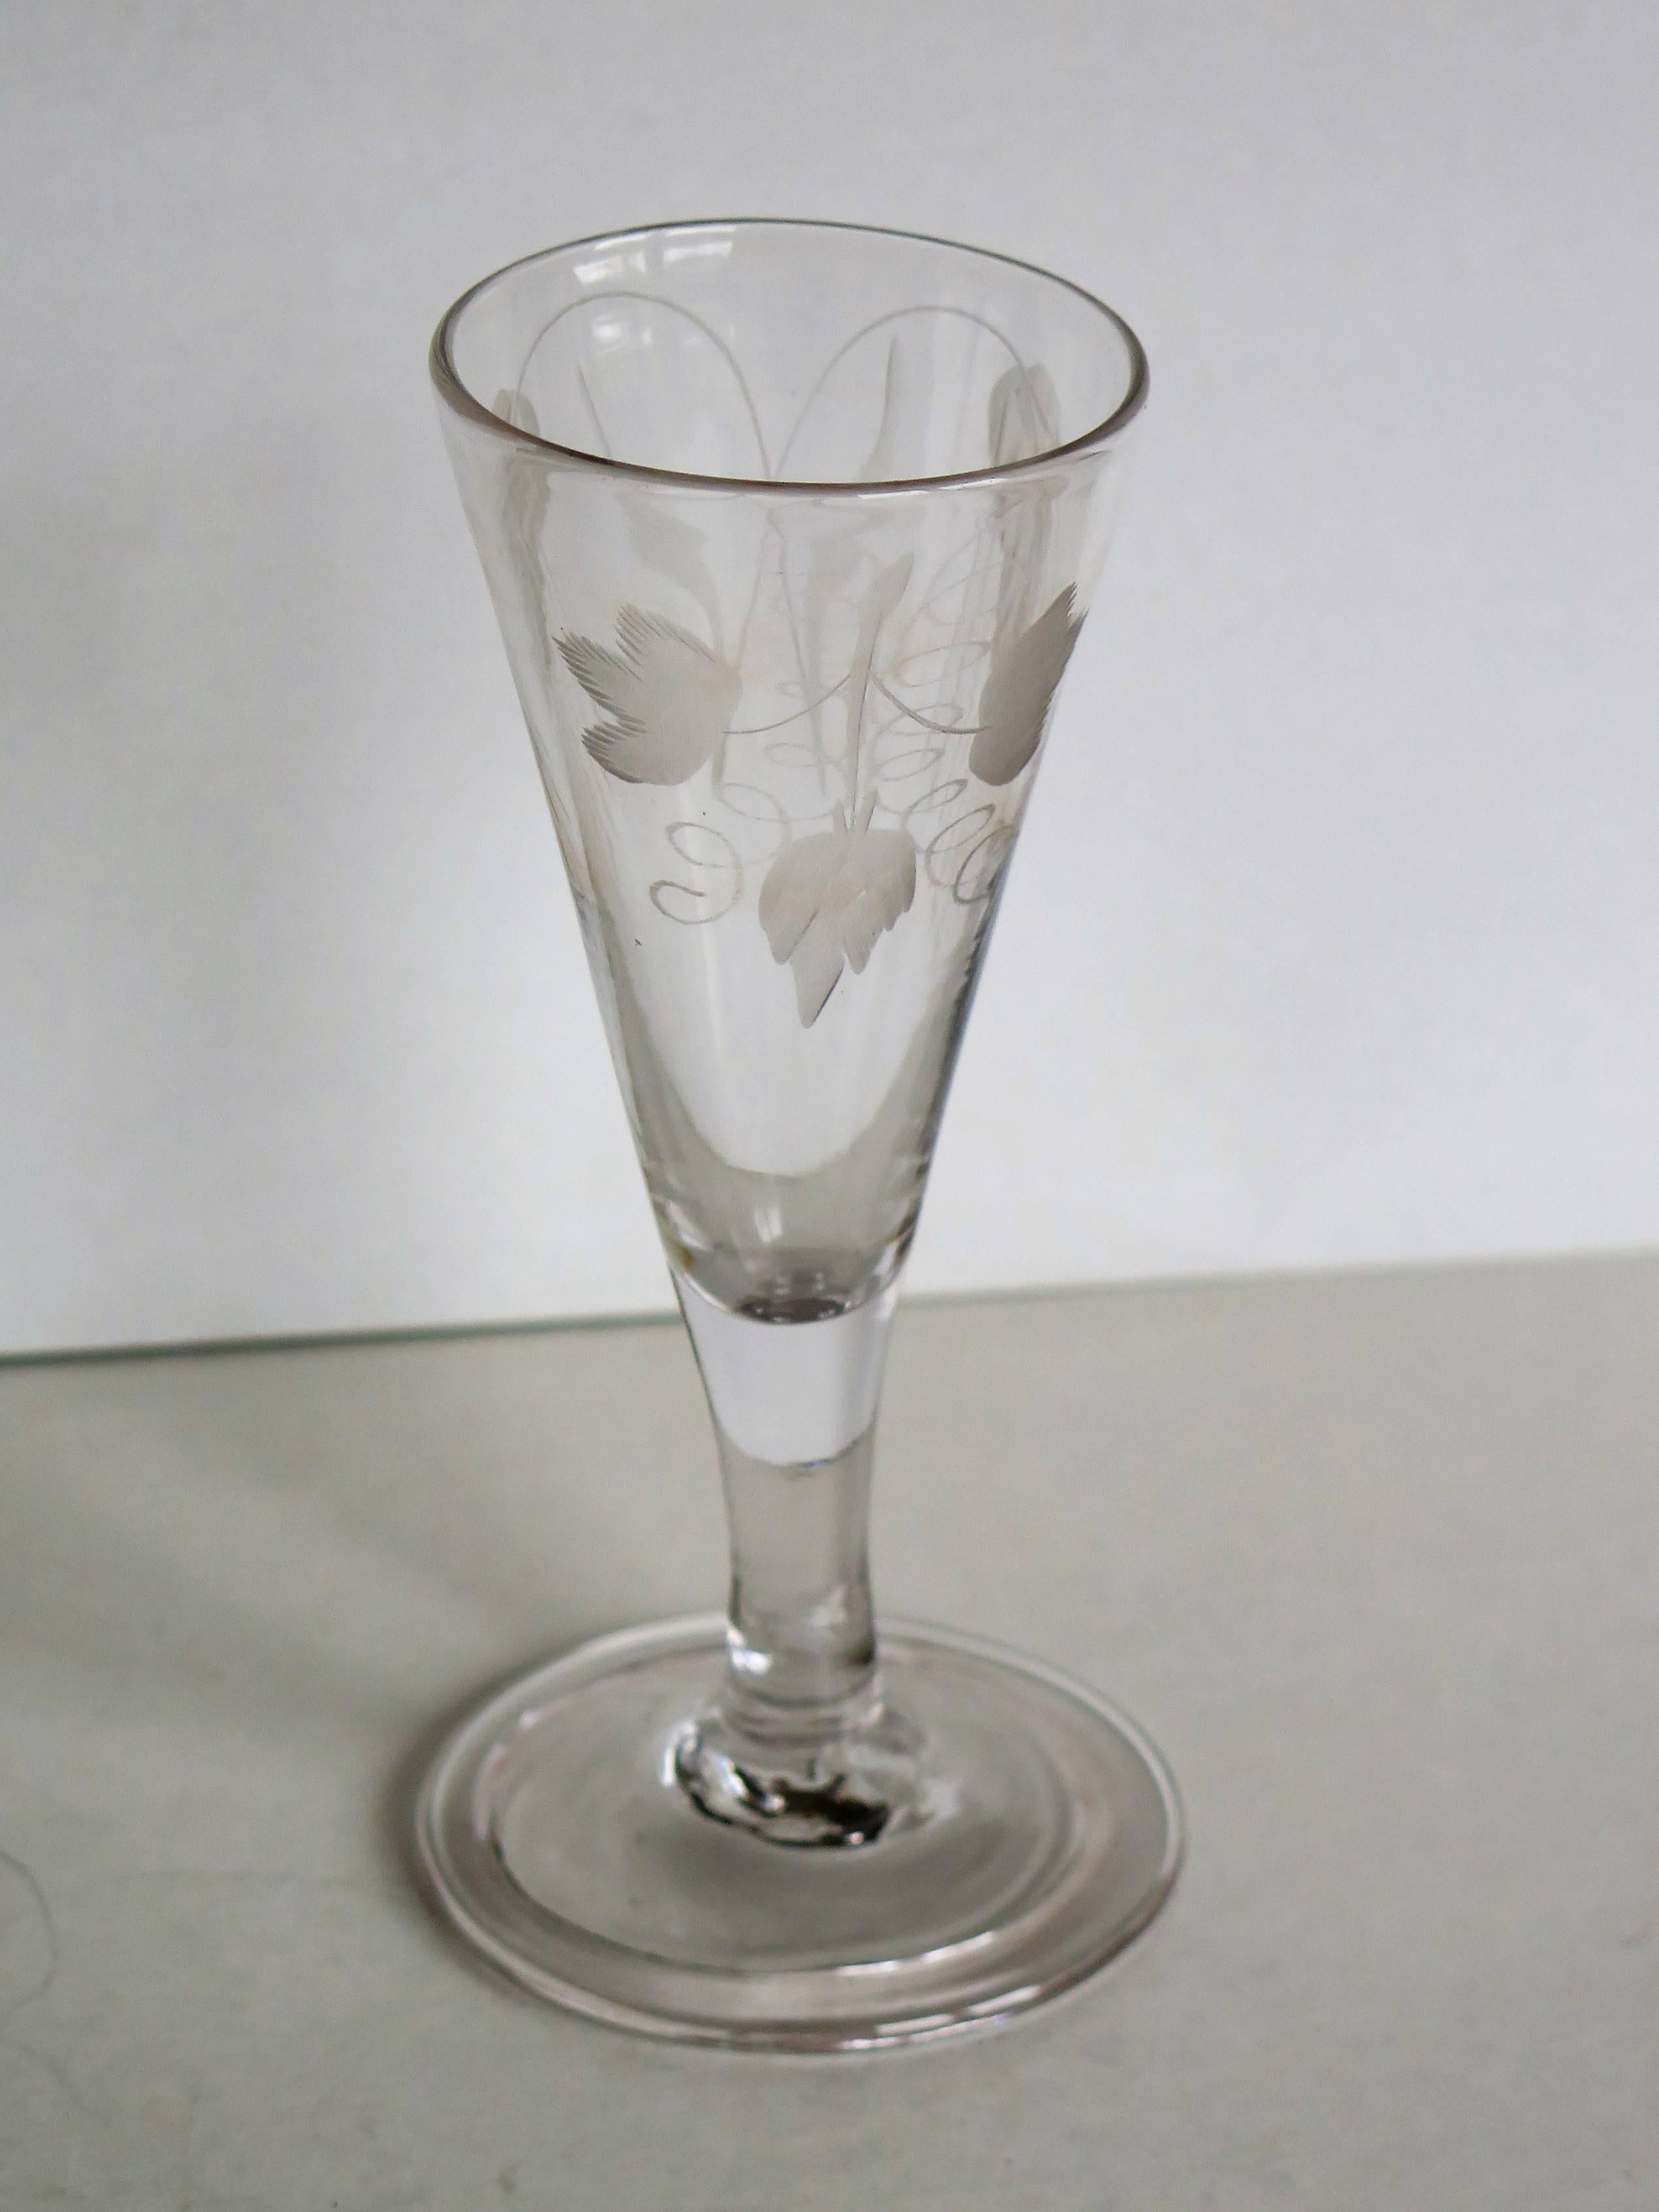 Hand-Crafted Mid-Georgian Ale Drinking Glass Handblown Engraved with Hops and Barley, Ca 1750